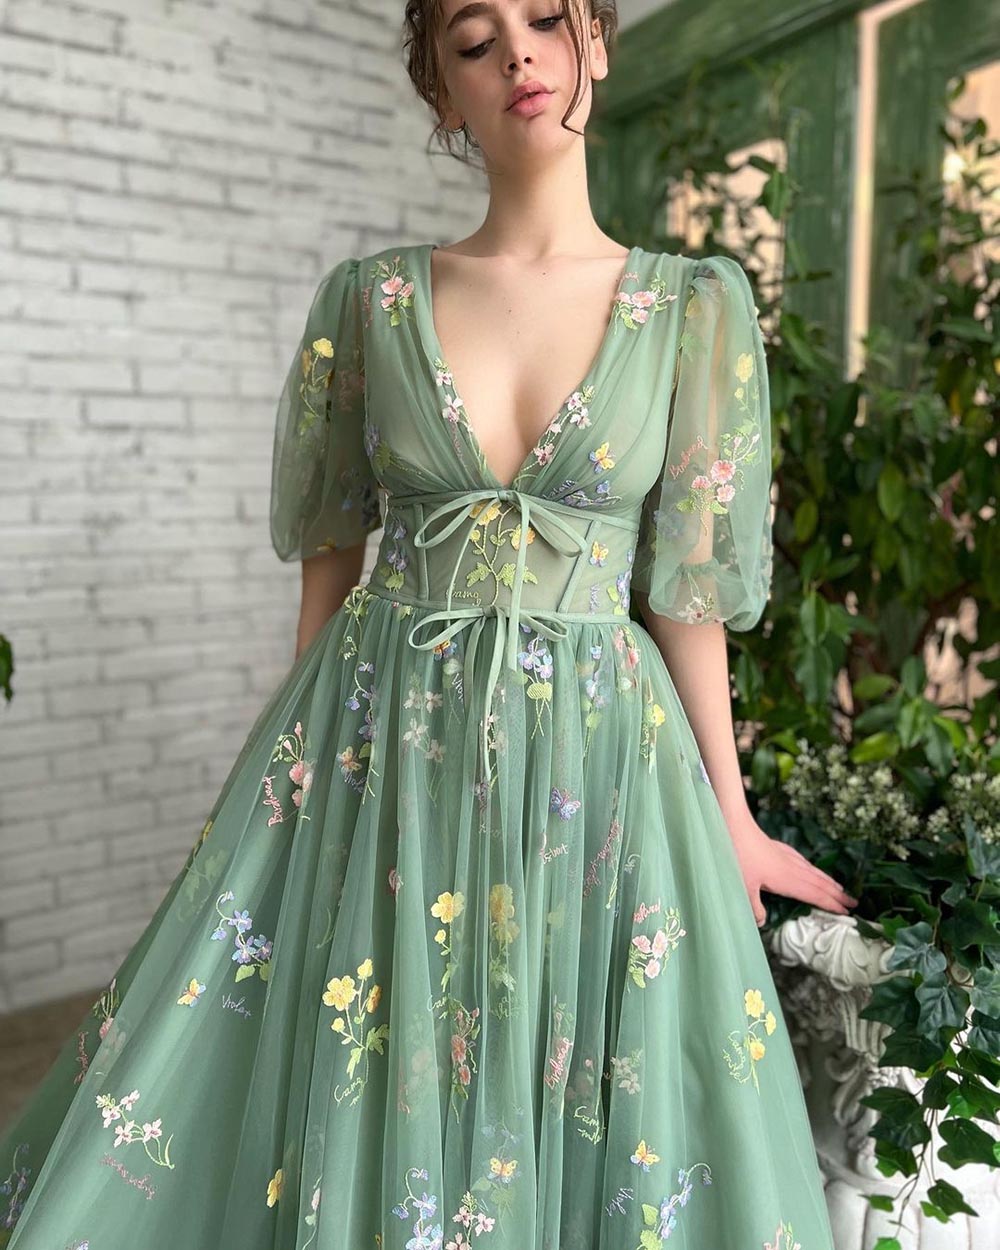 Green Embroidery Lace Prom Dresses Puff Sleeves A-Line Long Wedding Party Gowns Open Back Tulle Evening Dress